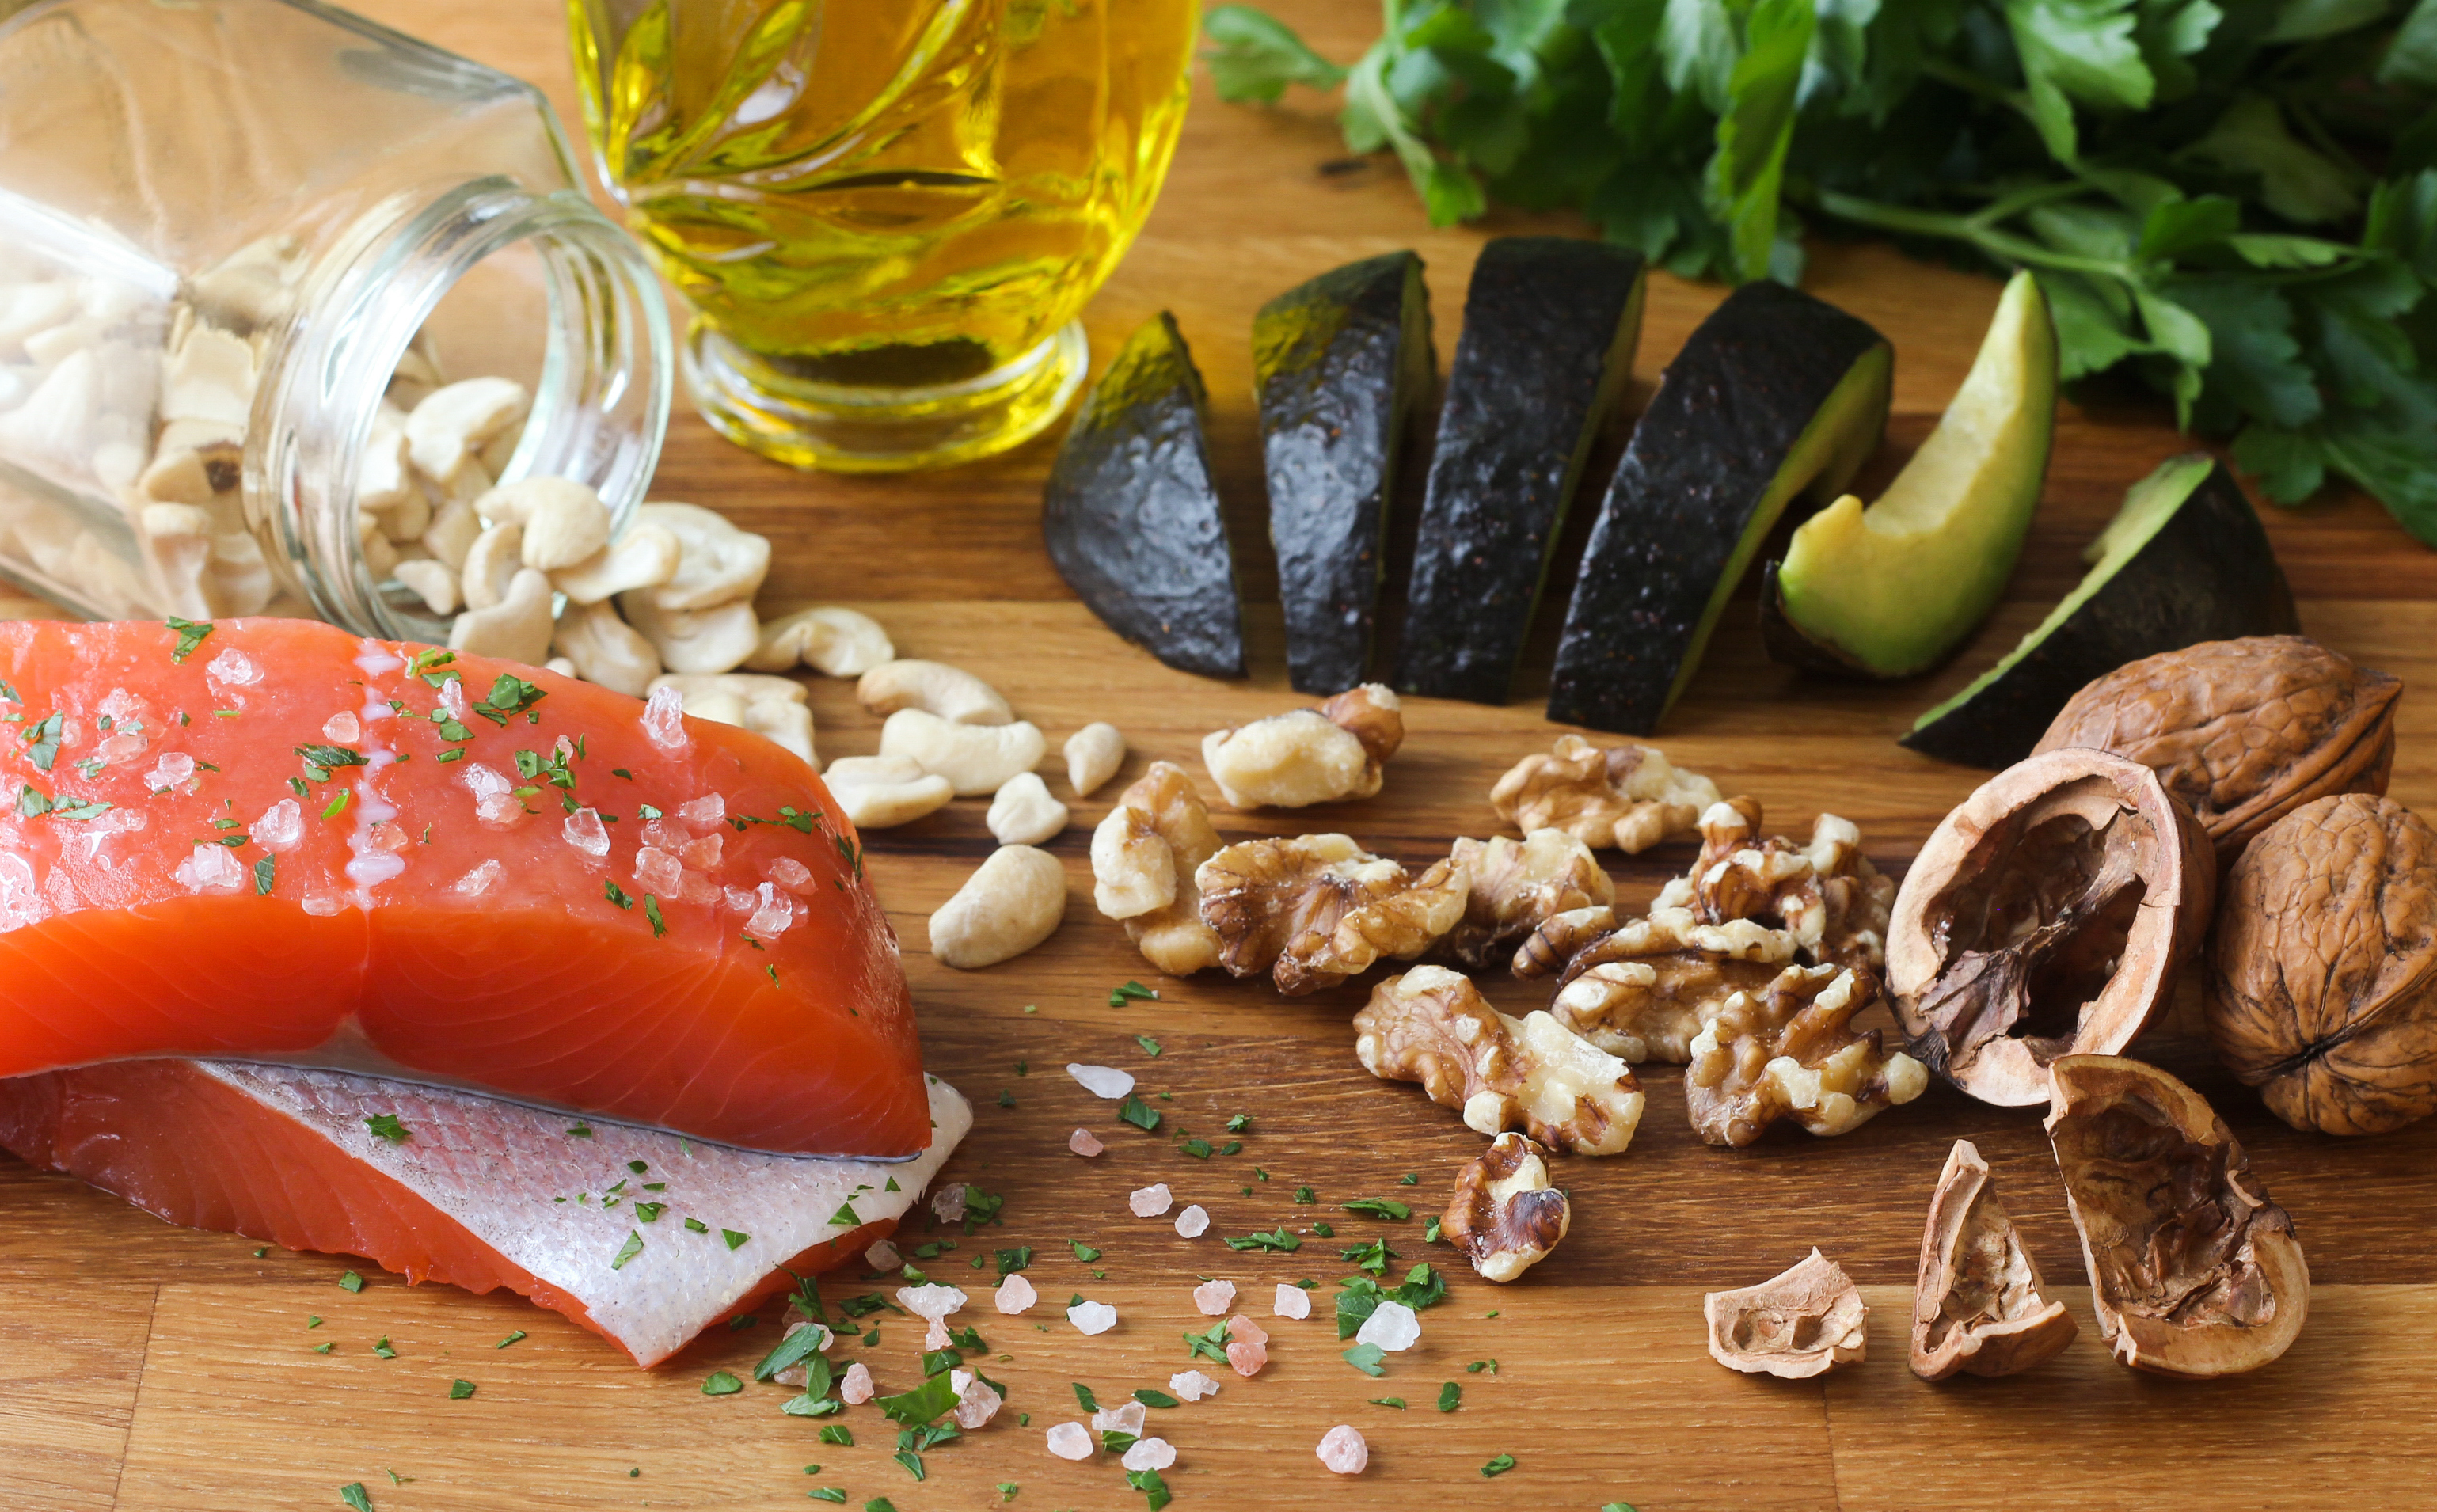 A Mediterranean diet is rich in plant protein, fish and olive oil (Getty Images)